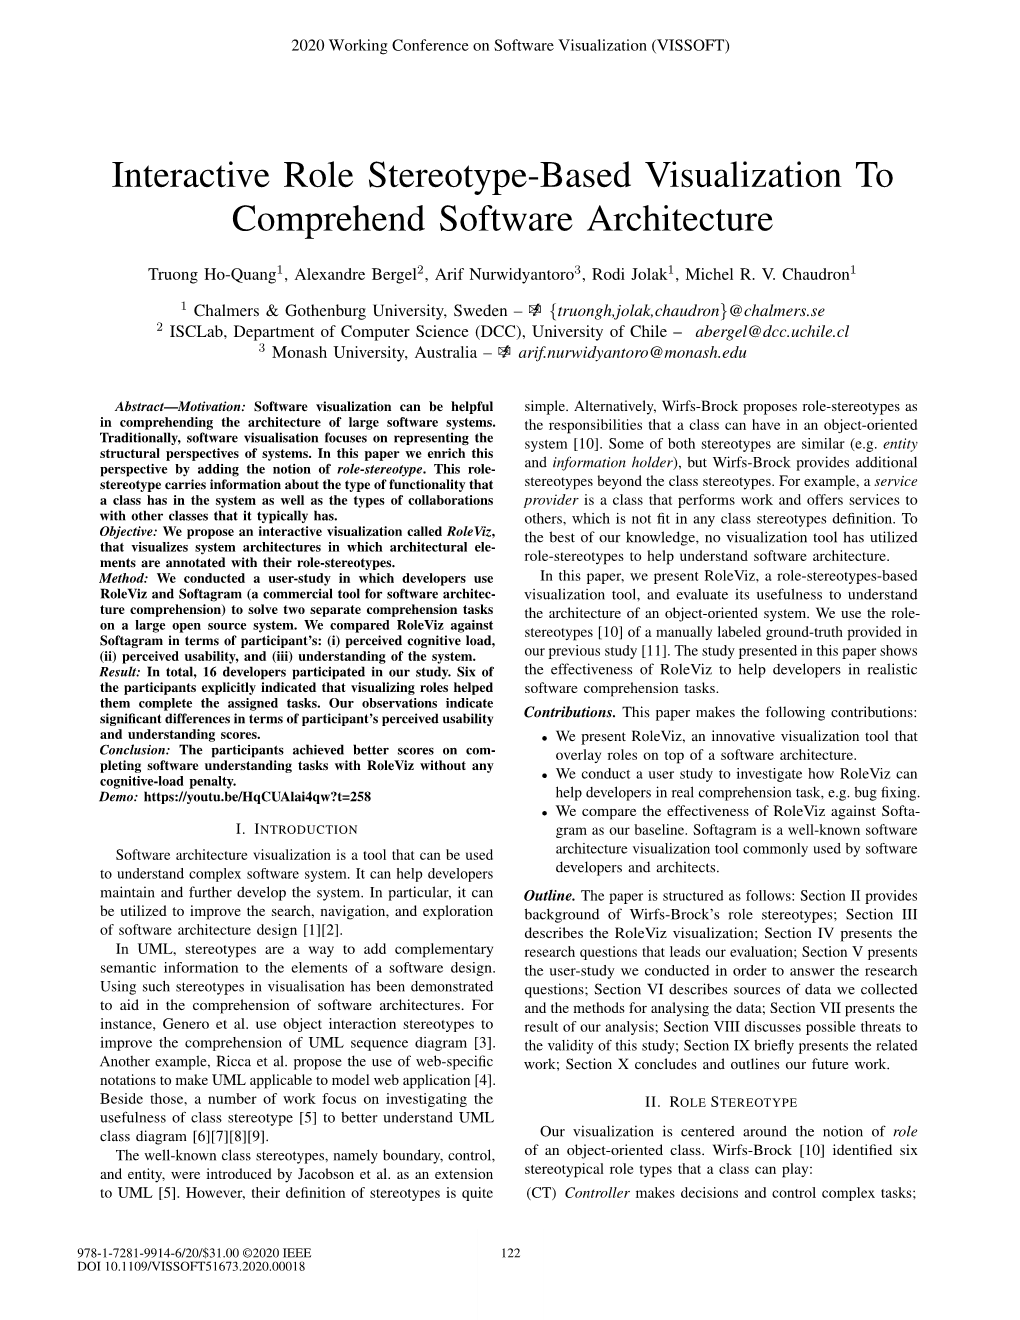 Interactive Role Stereotype-Based Visualization to Comprehend Software Architecture